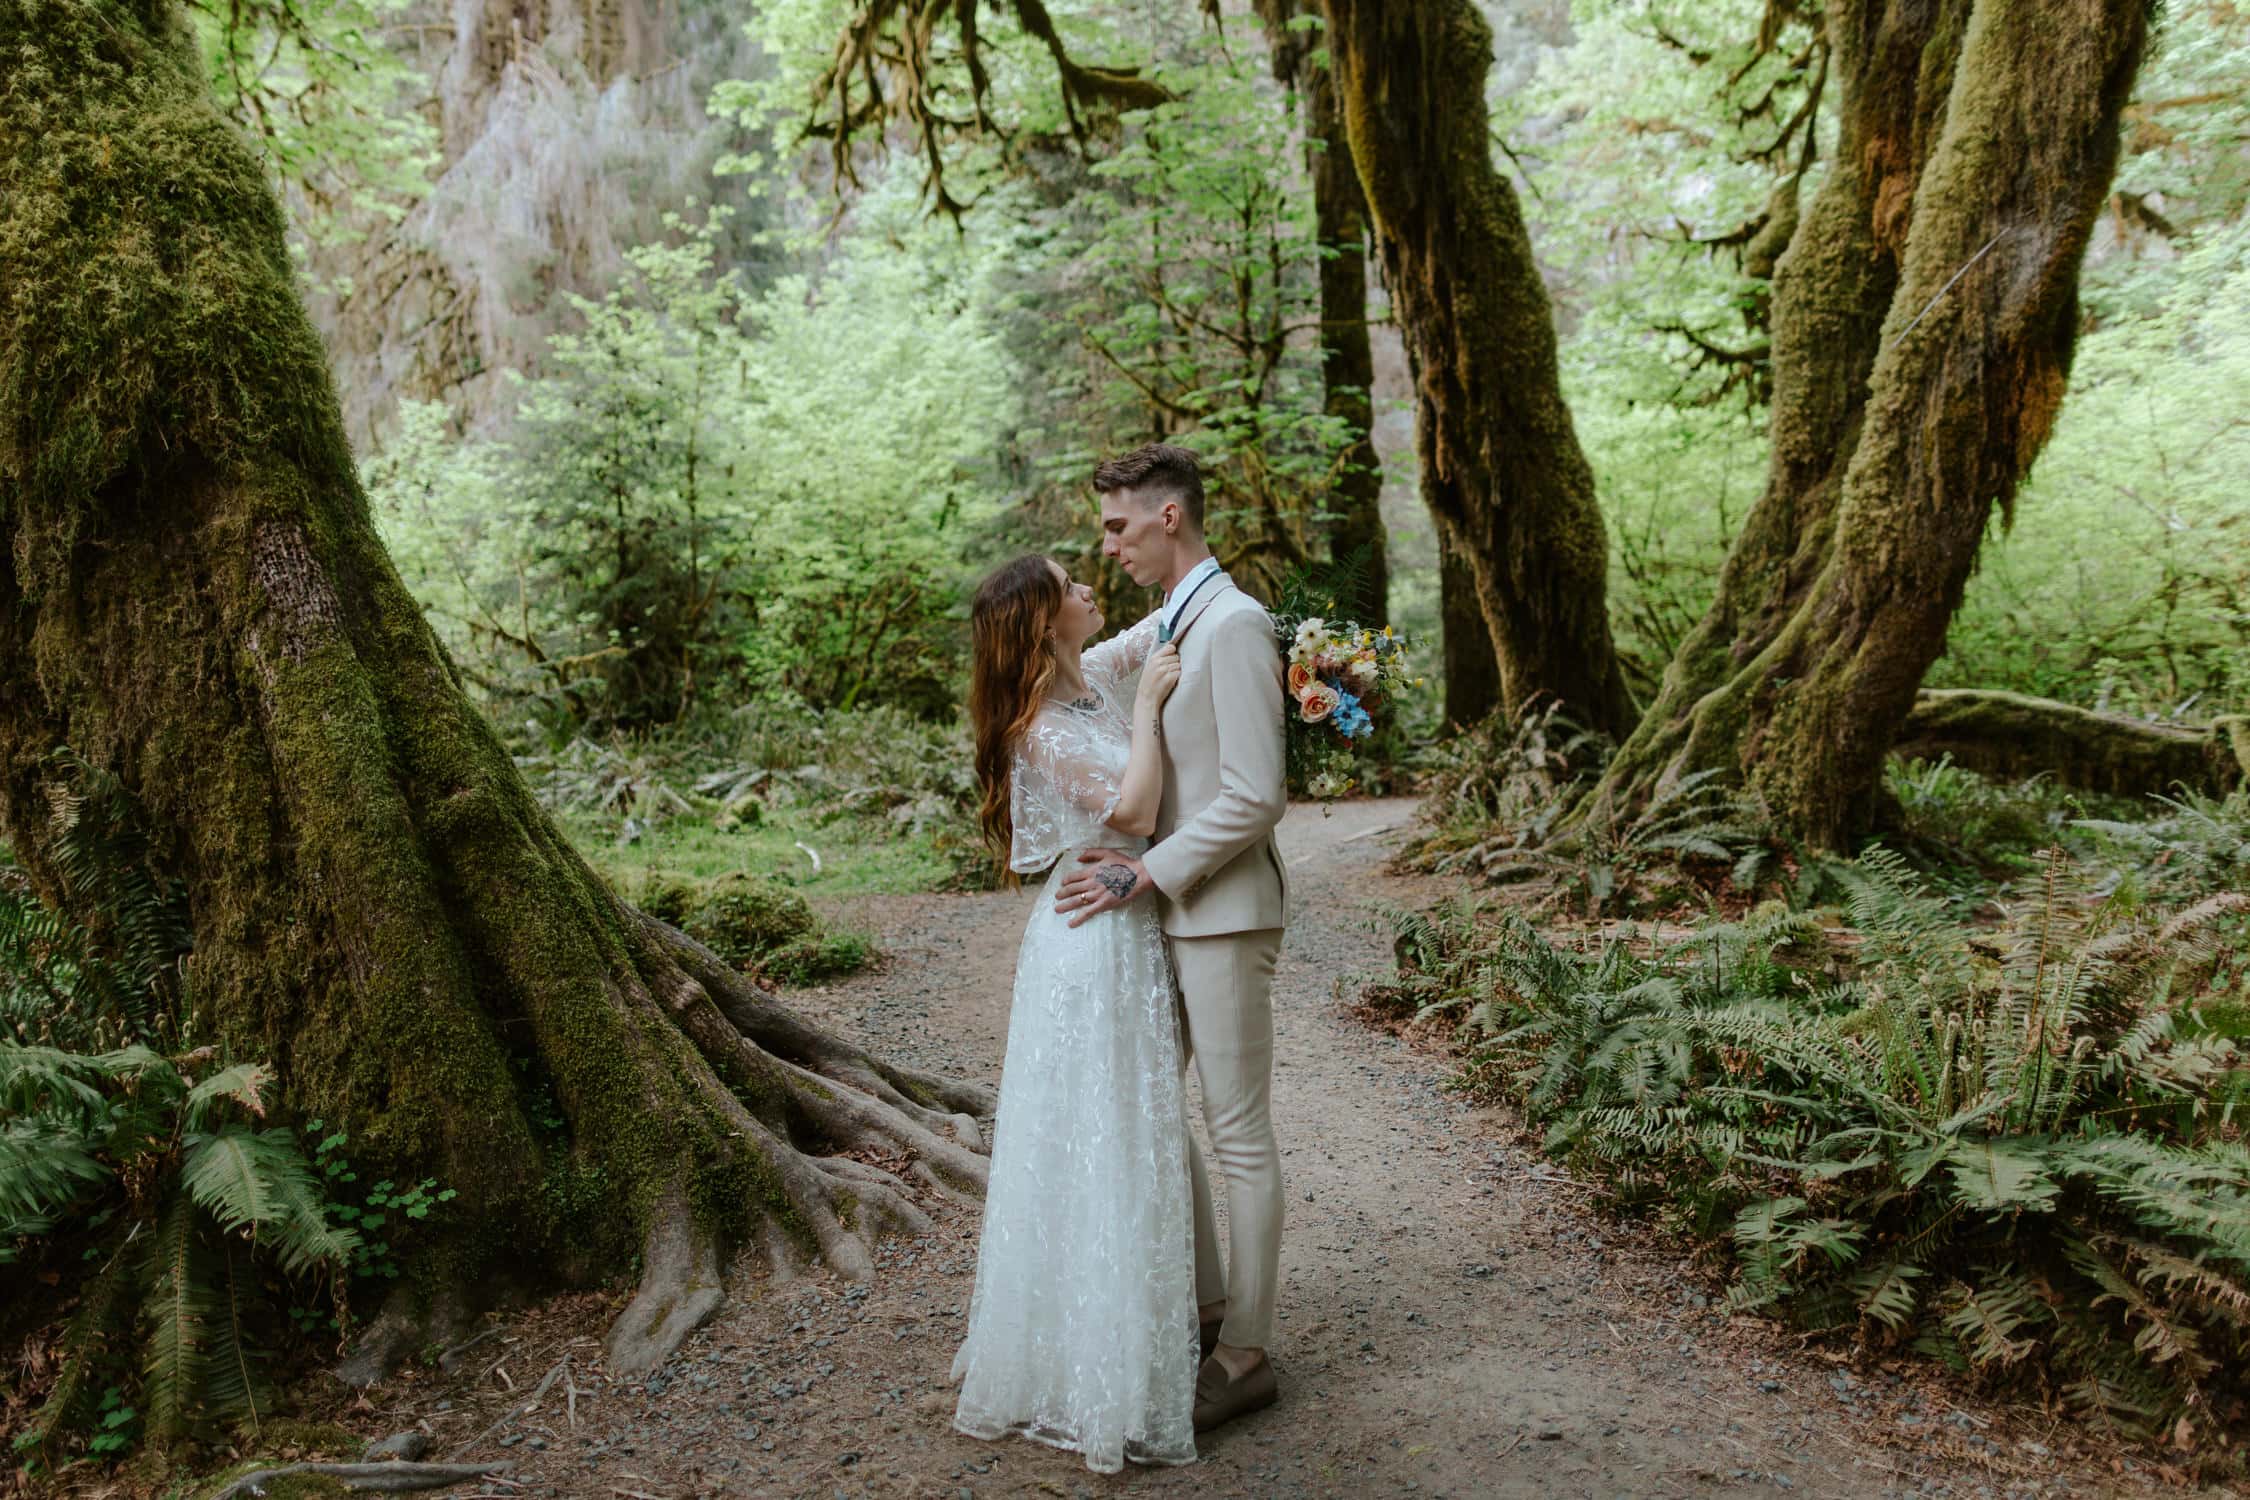 A bride and groom looking up at each other in the Hoh Rainforest on their elopement day.